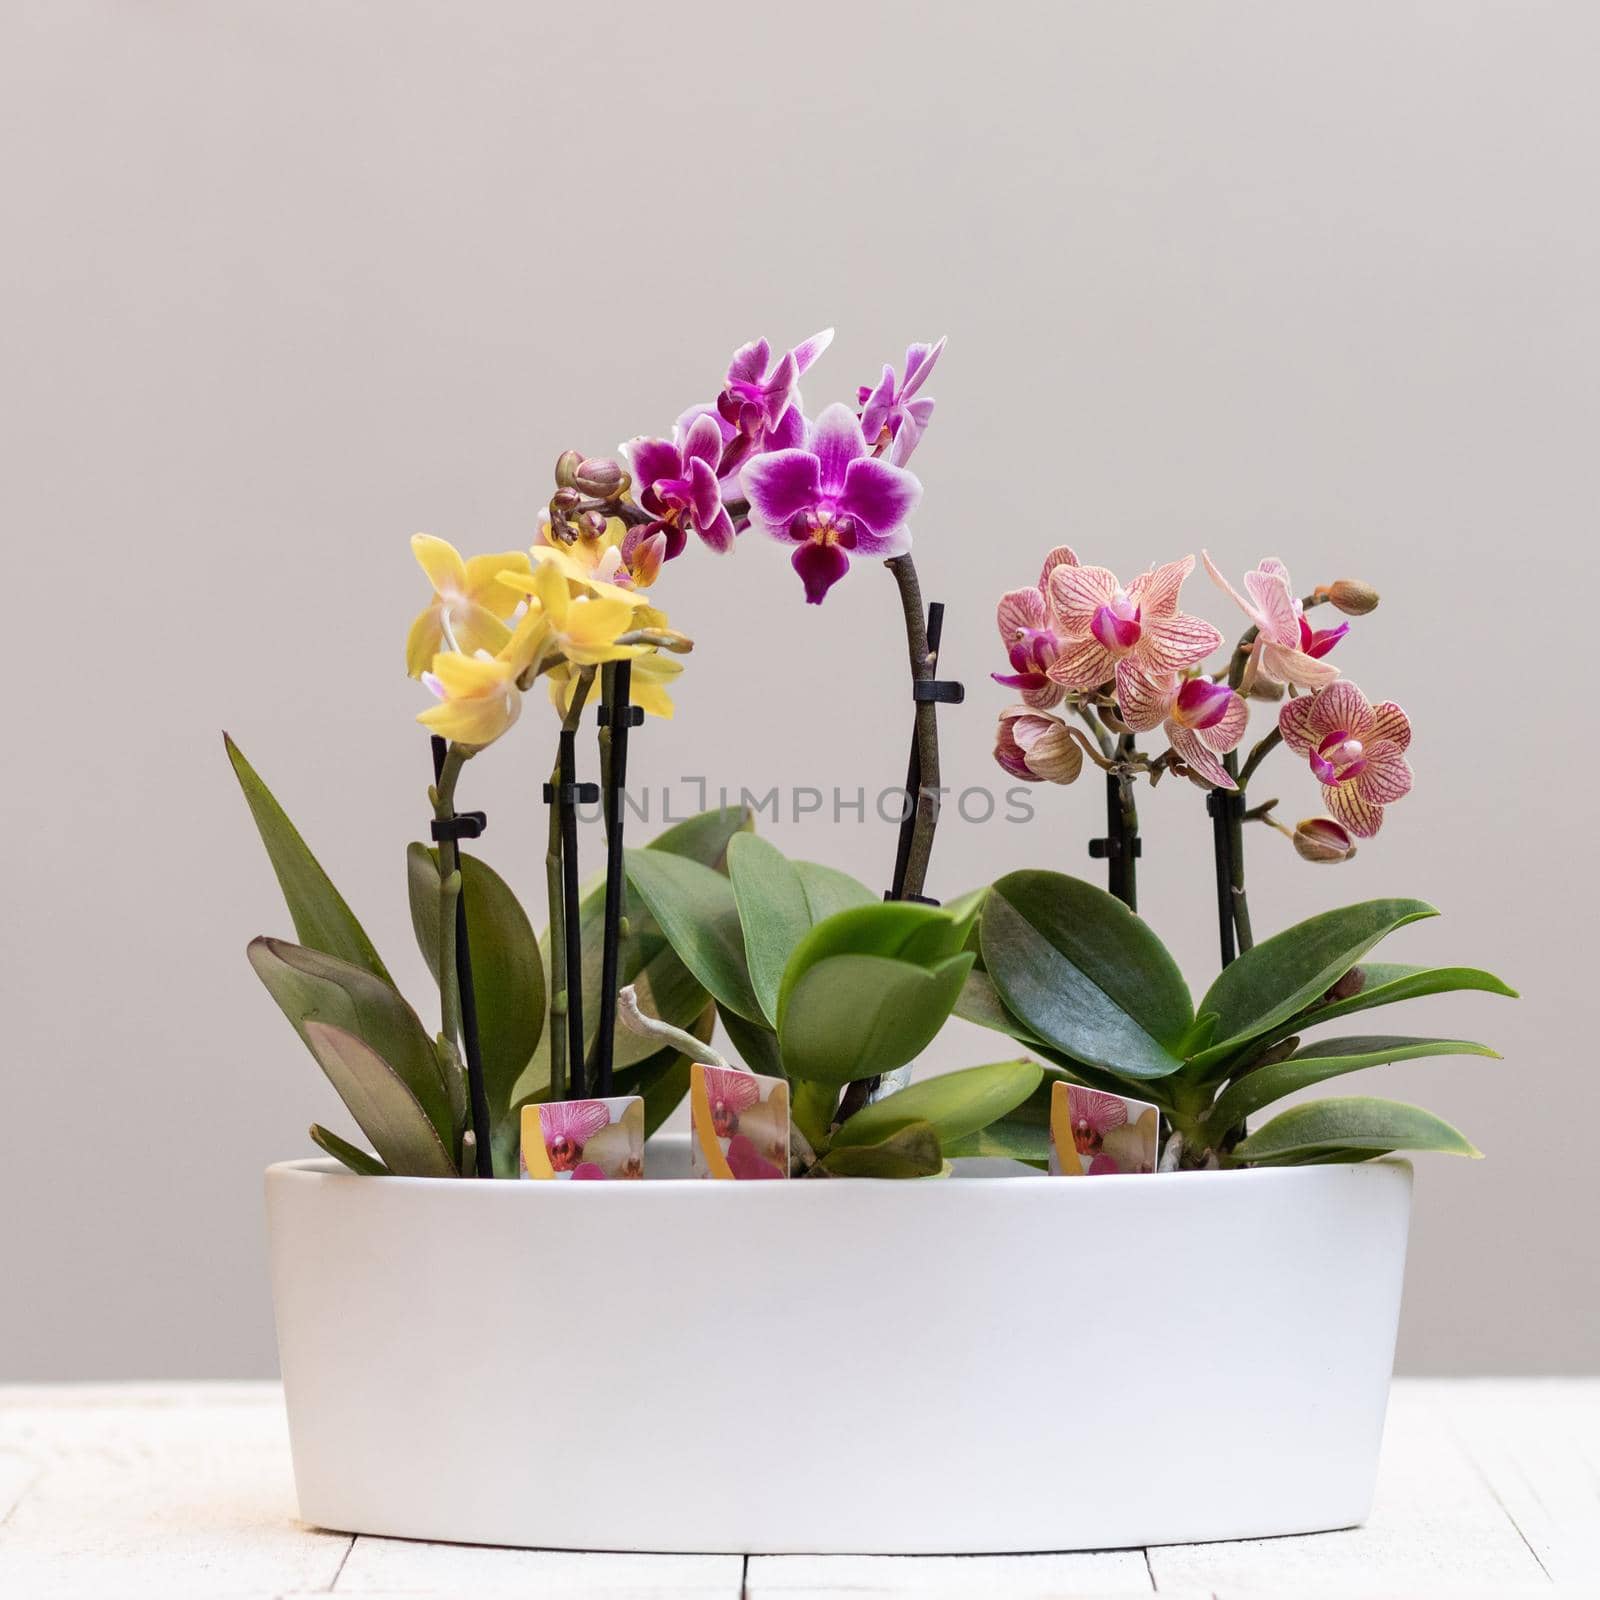 Boat orchid, cymbidium in the white pot by ferhad